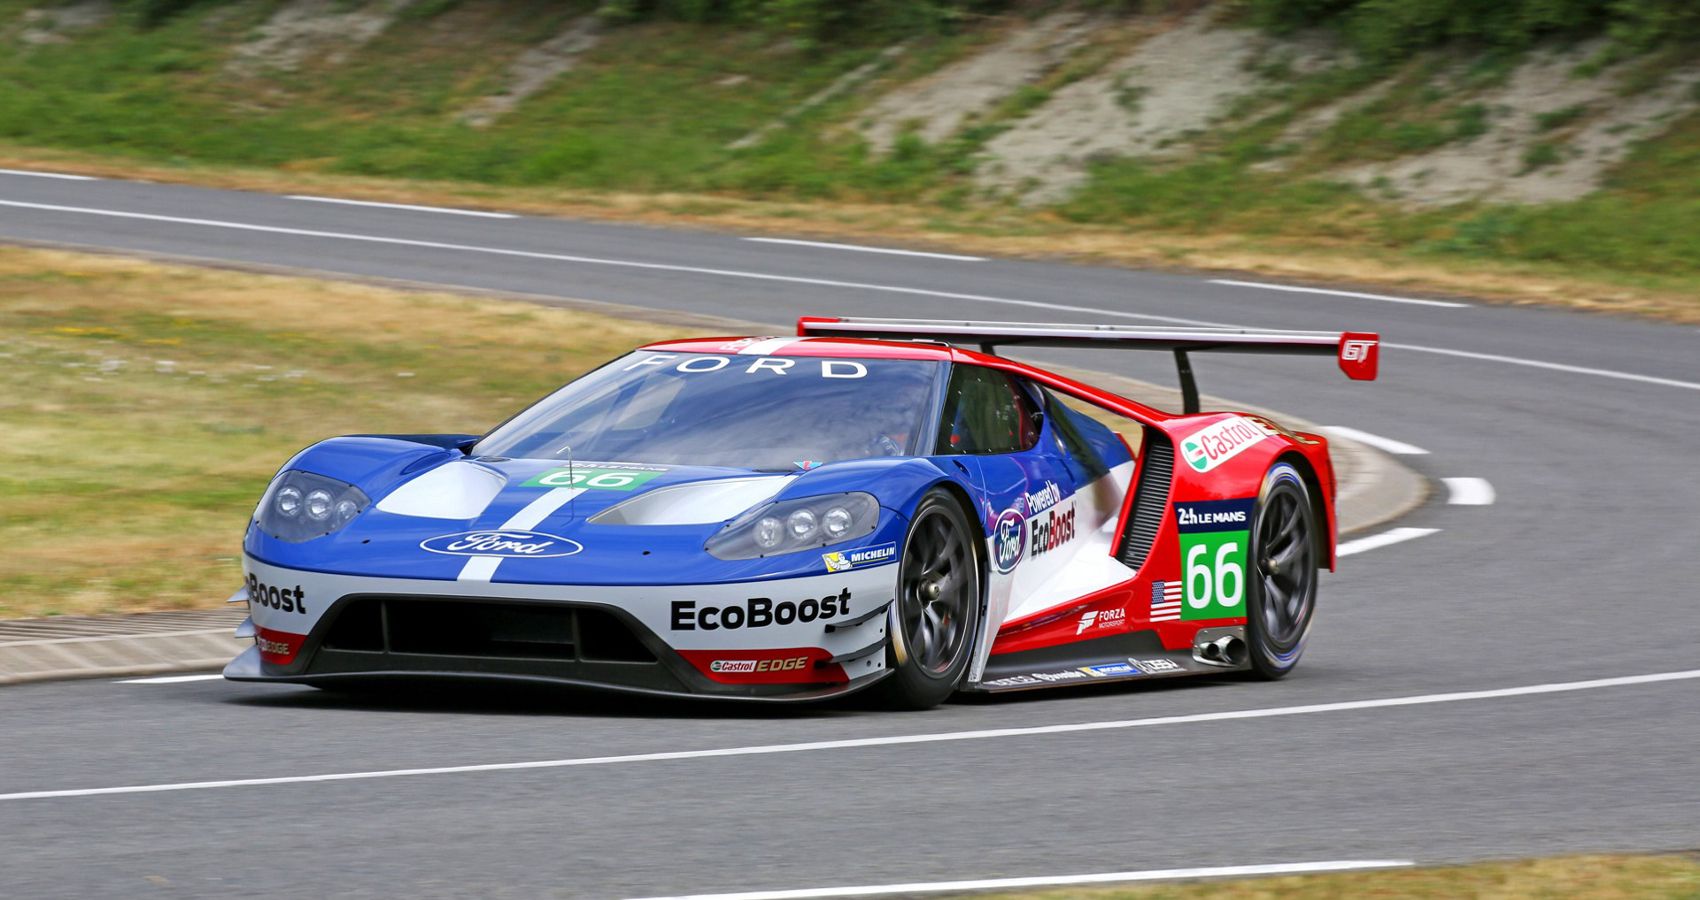 Ford's GT, From The Skunk Works Basement To Race Winner